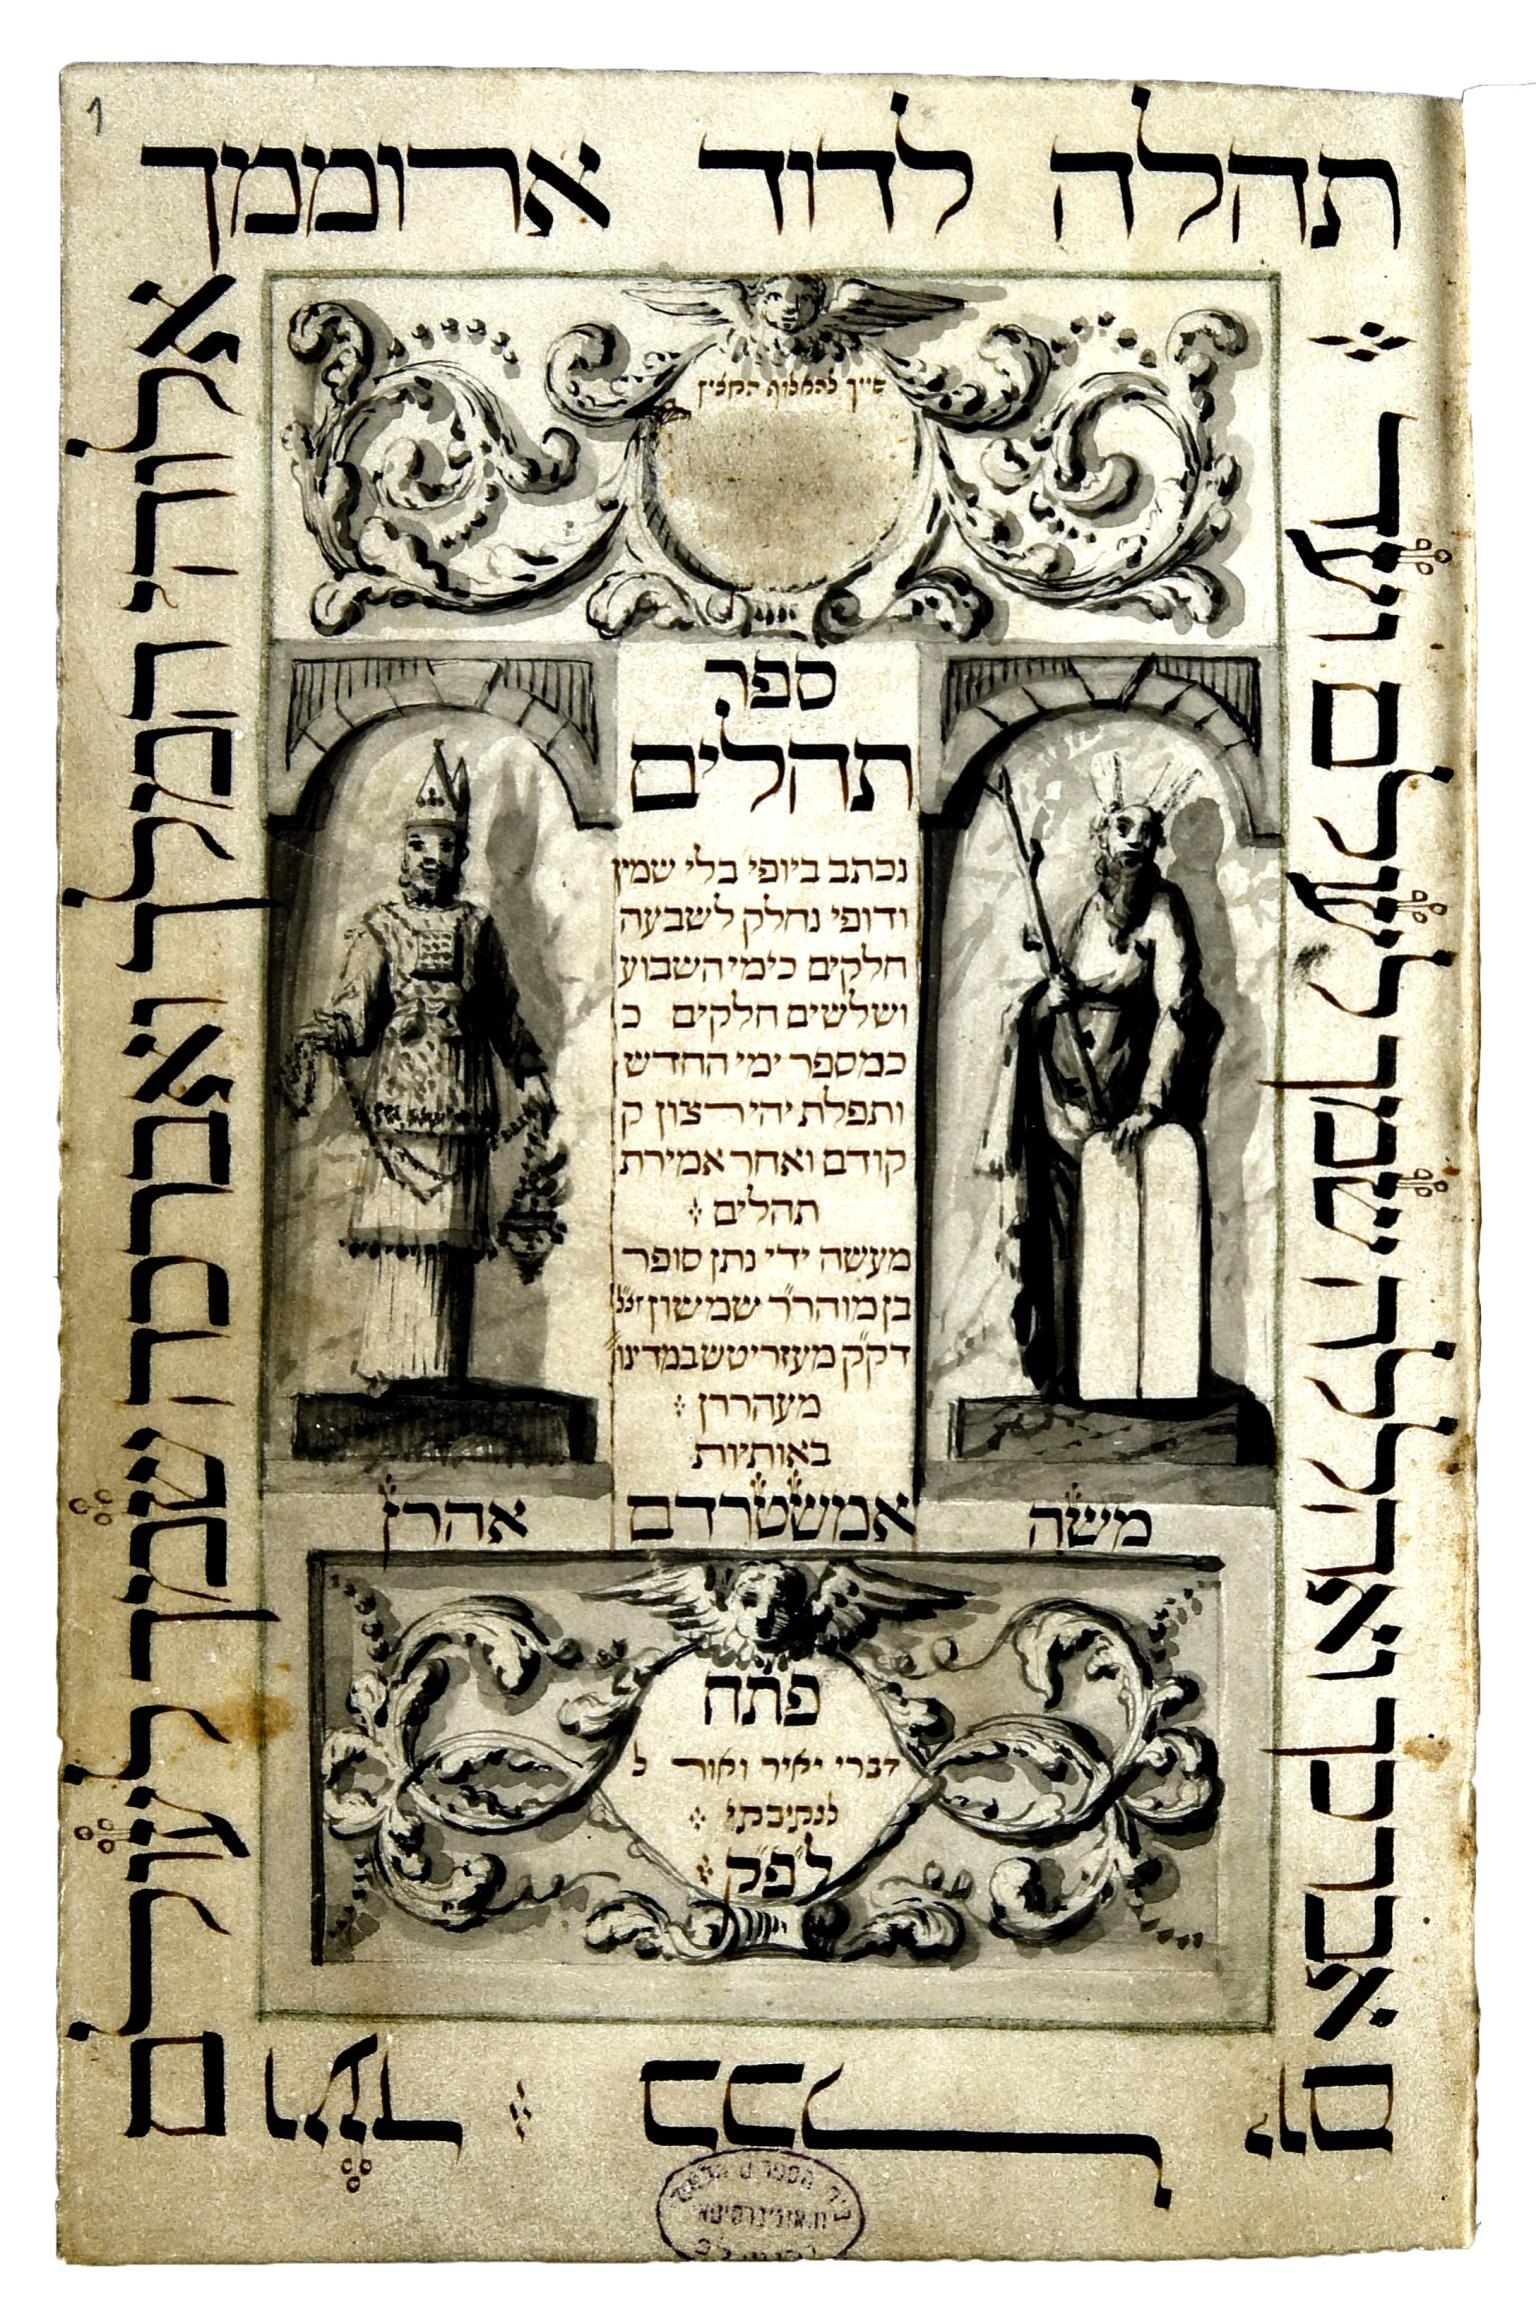 Printed page with Hebrew and Yiddish text in center flanked by two figures with decorative borders at top and bottom, and text wrapping around margins of page. 